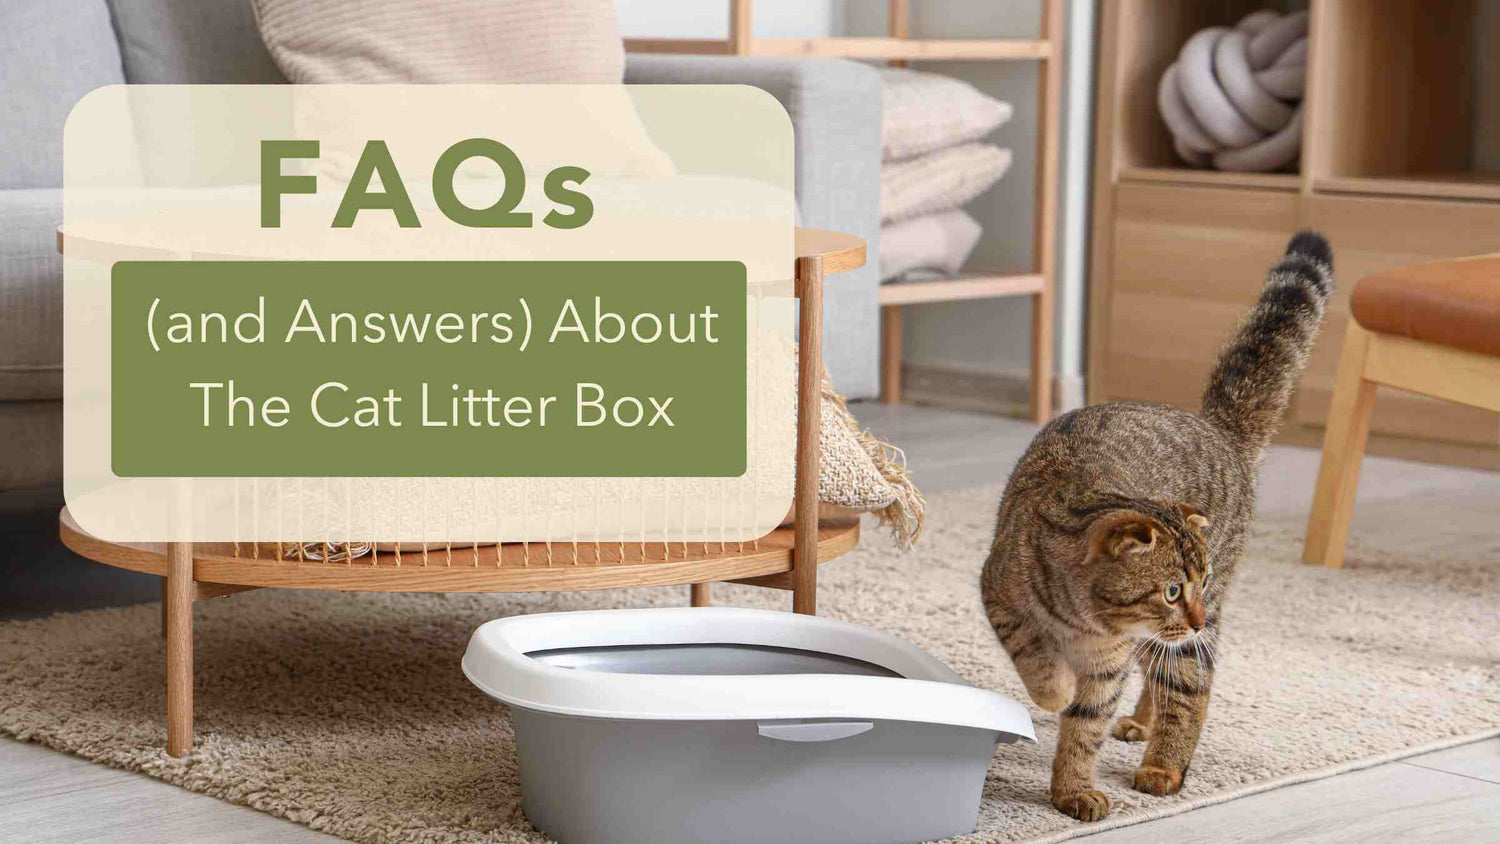 FAQs about The Cat Litter Box text overlay with a cat walking past a litter box in a cozy living room setting